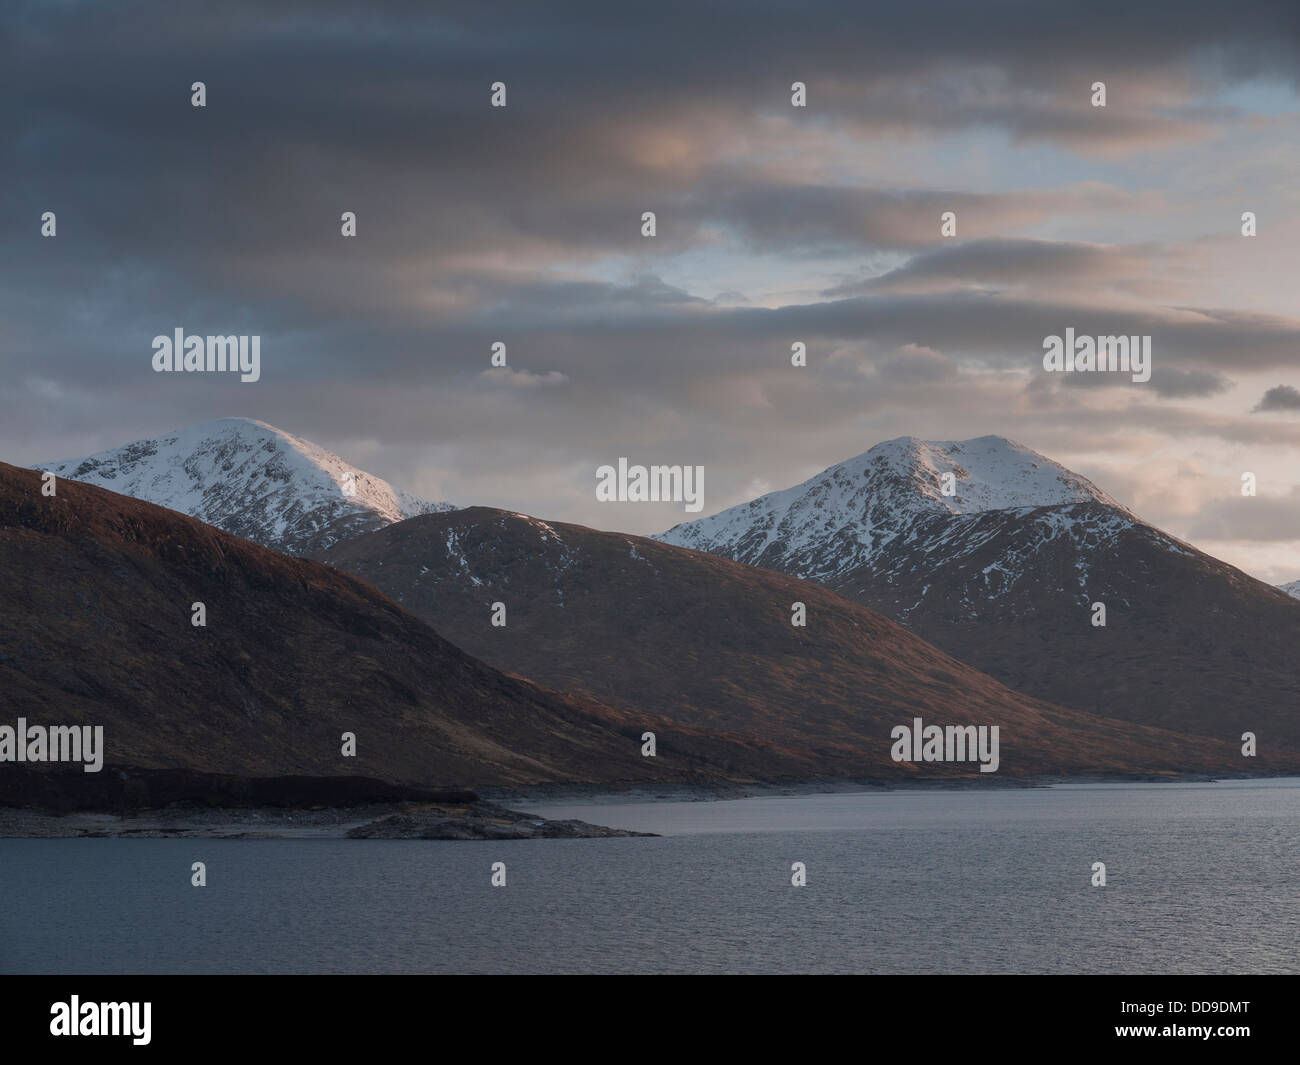 The view across Loch Quoich towards the mountains Sgurr Mor and Sgurr na Fhuarain at sunset, North West Highlands, Scotland, UK Stock Photo